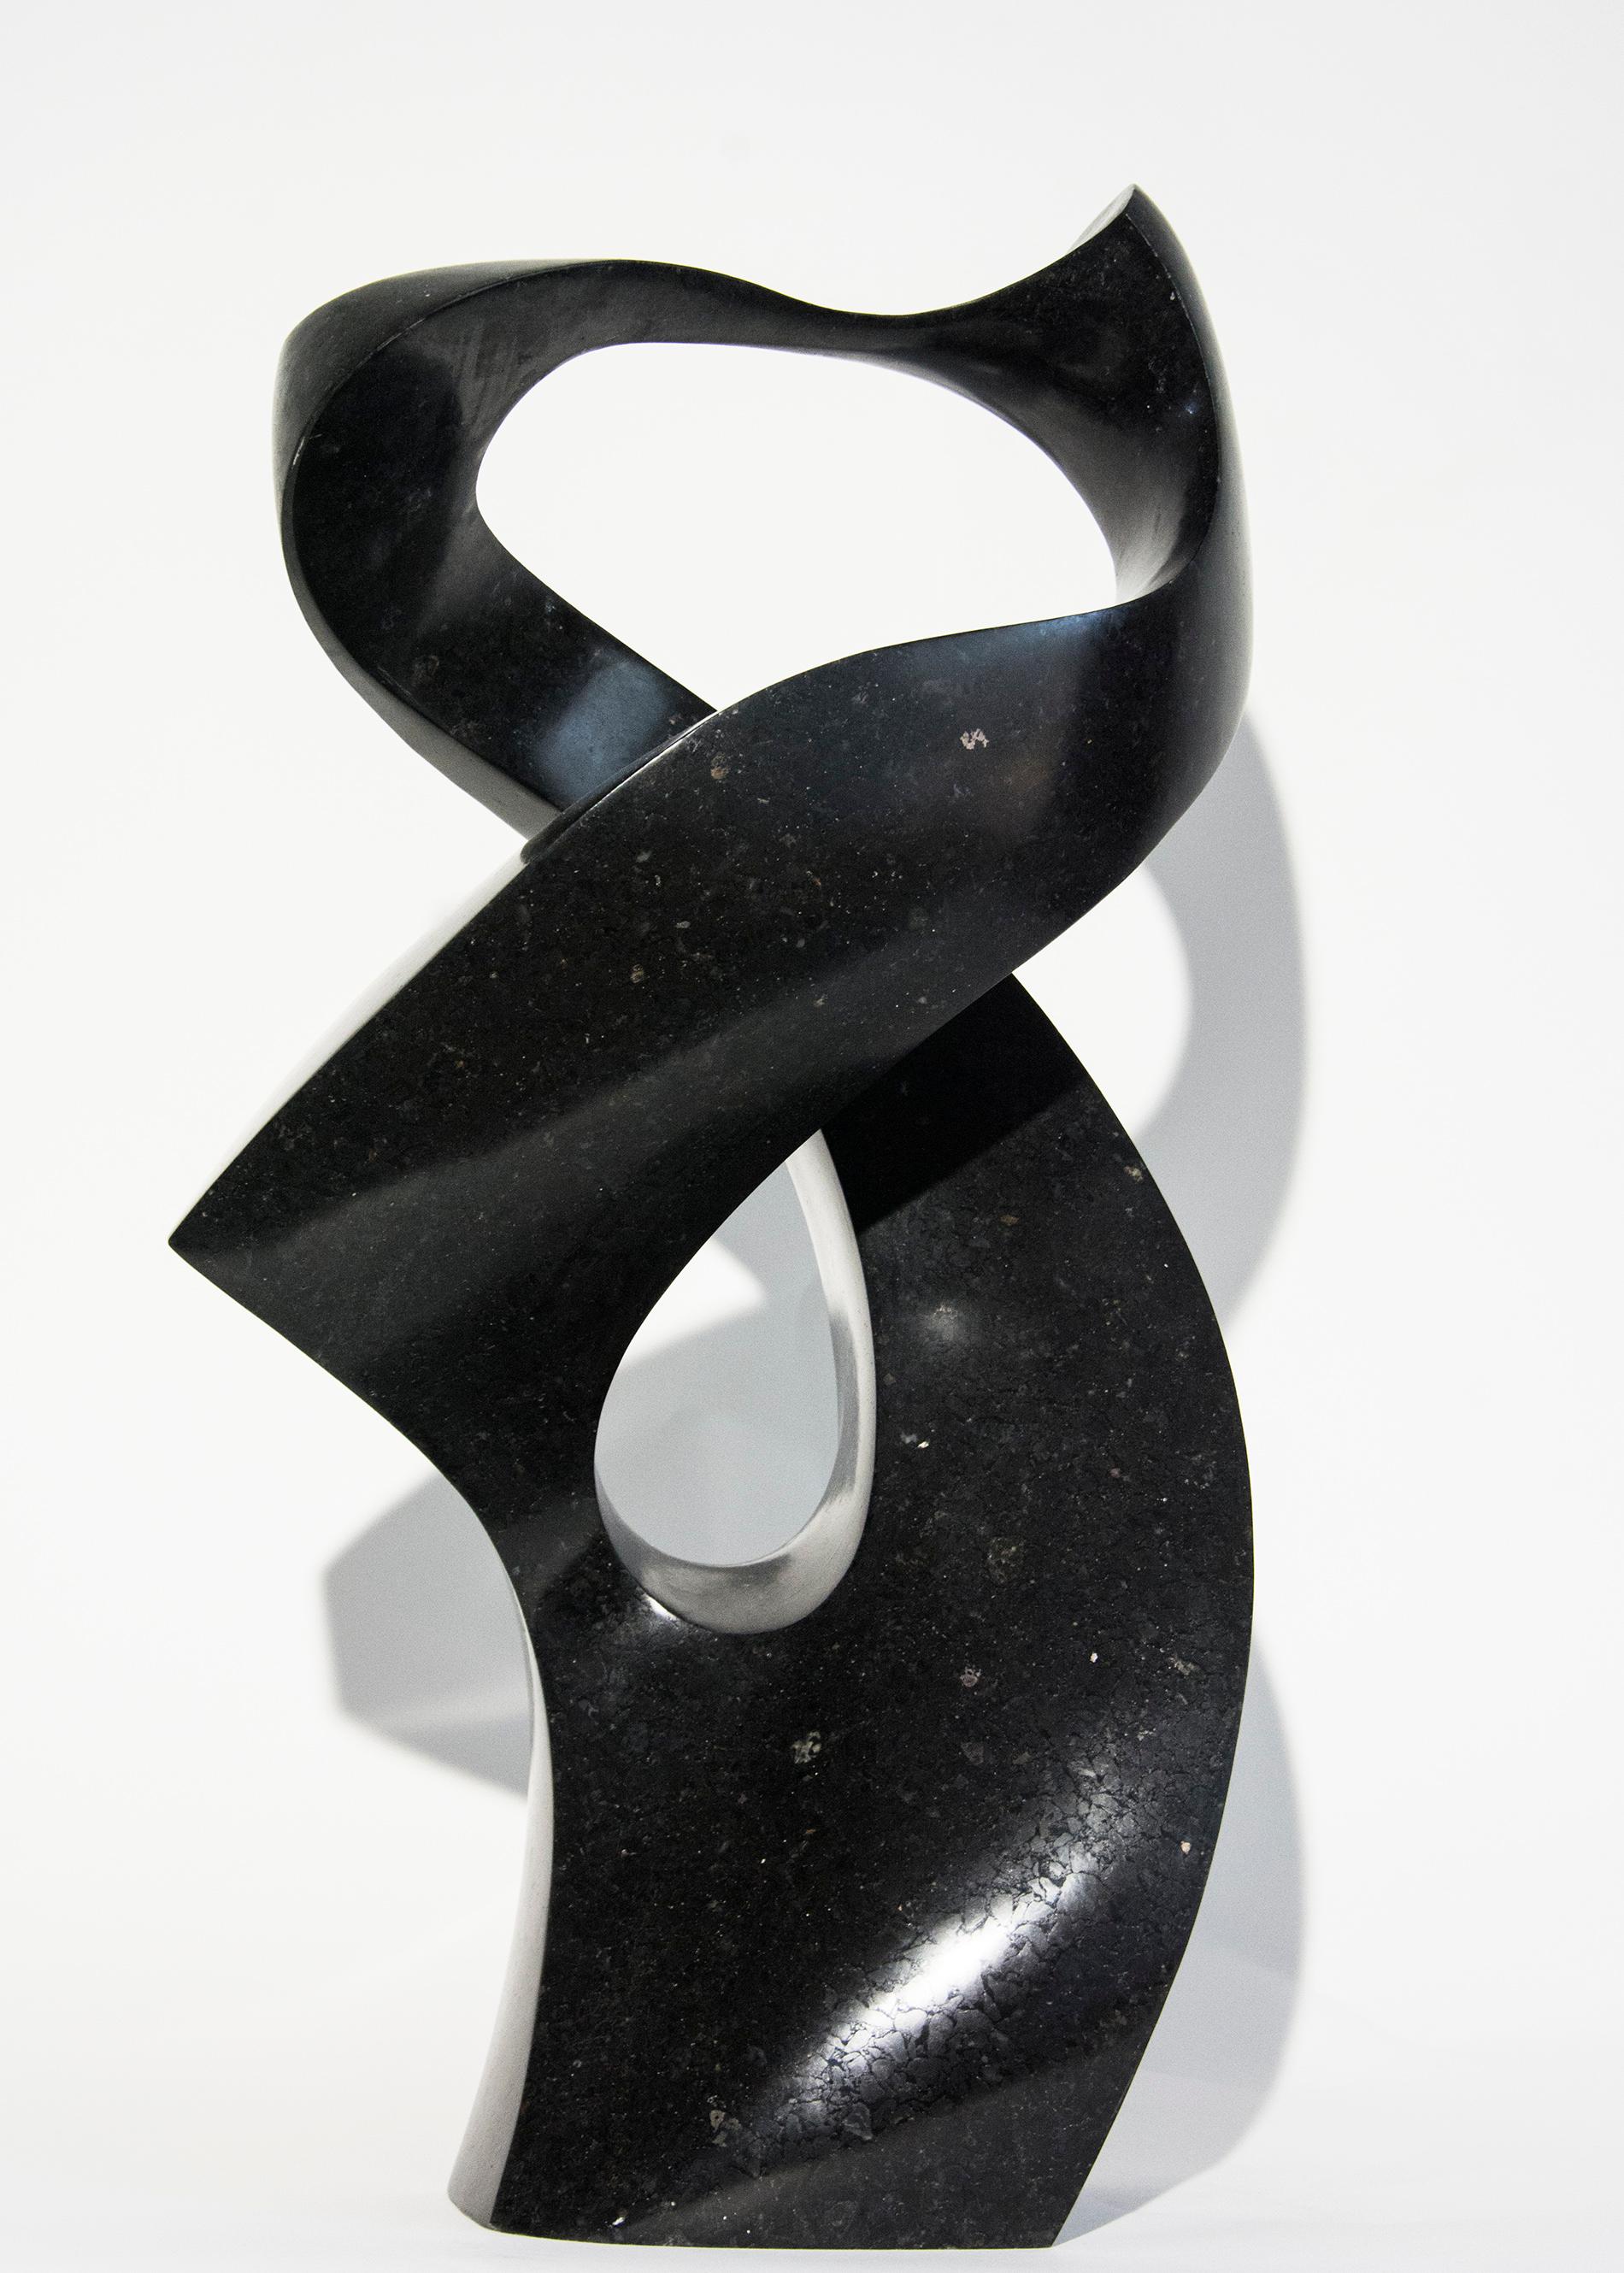 Jeremy Guy Abstract Sculpture - Embrace 1/50 - small, smooth, polished, abstract, black granite sculpture